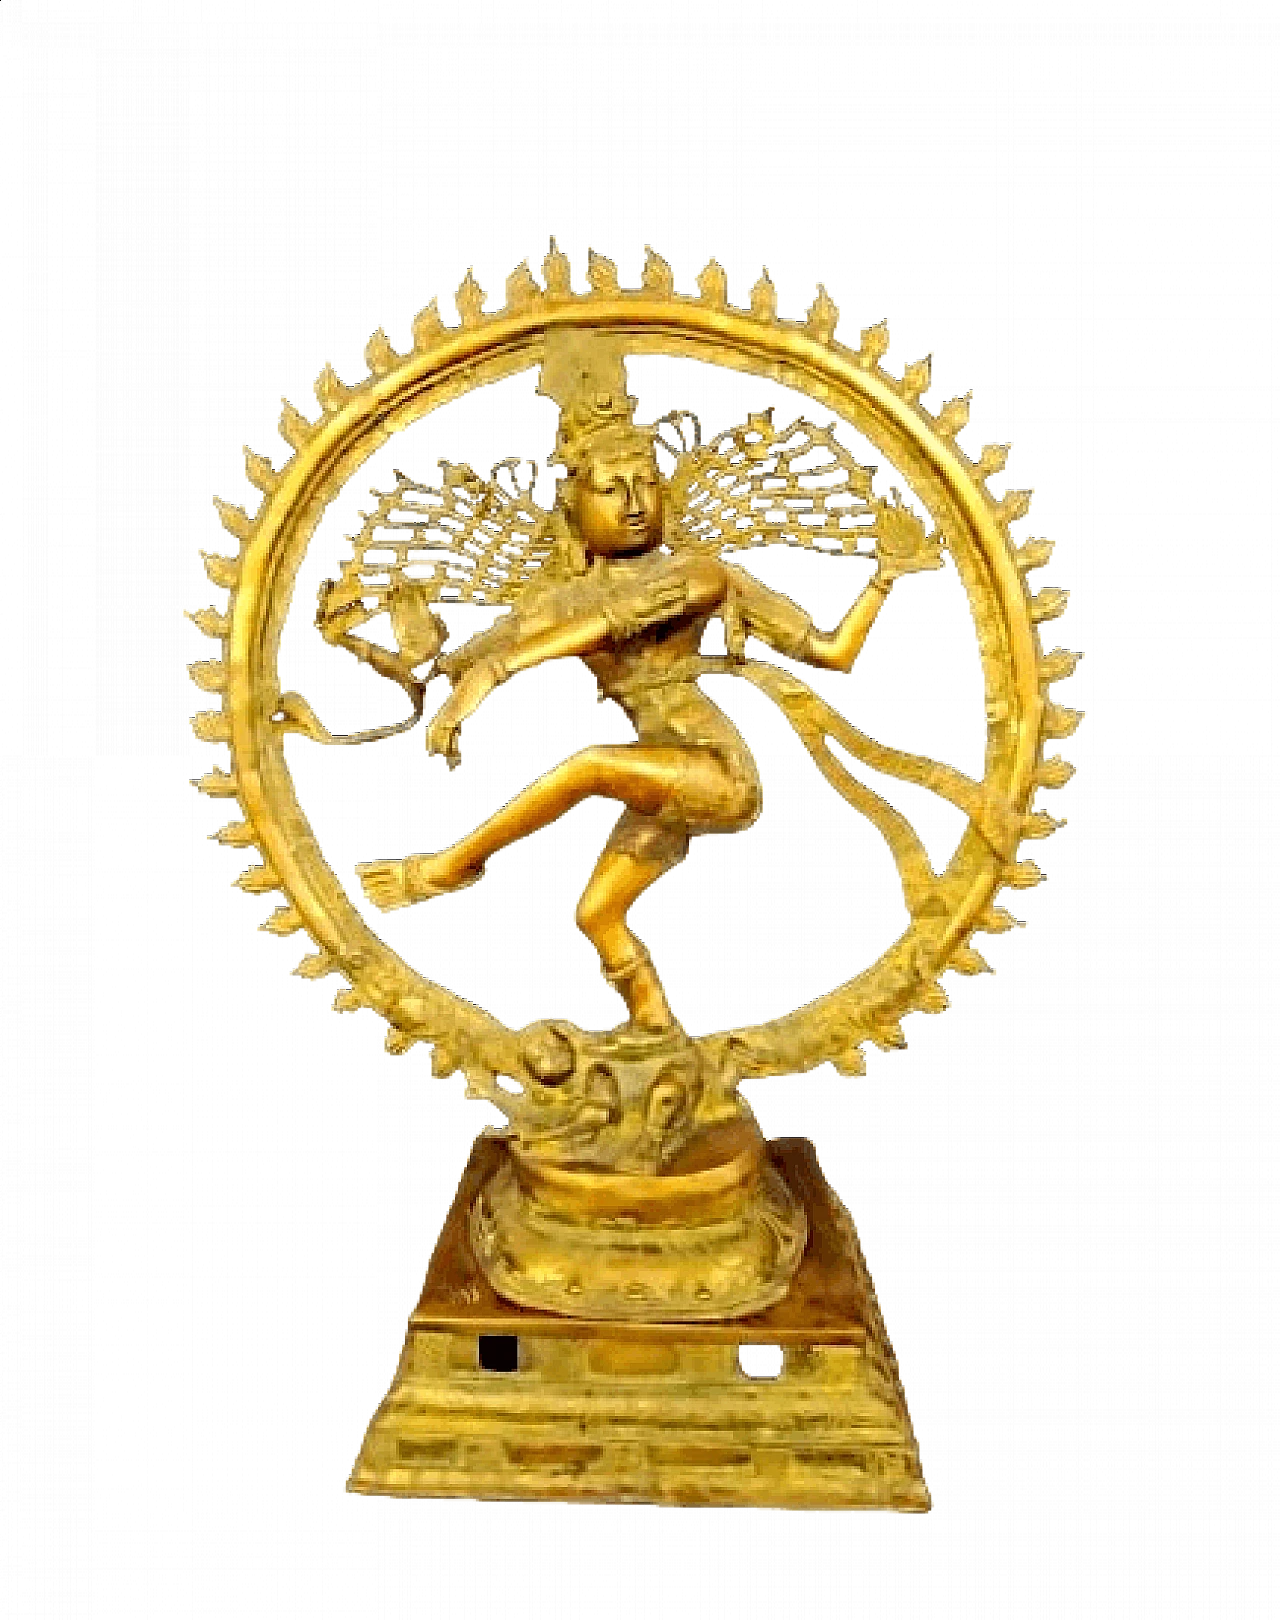 Shiva dancing in the circle of fire, brass sculpture, 19th century 6